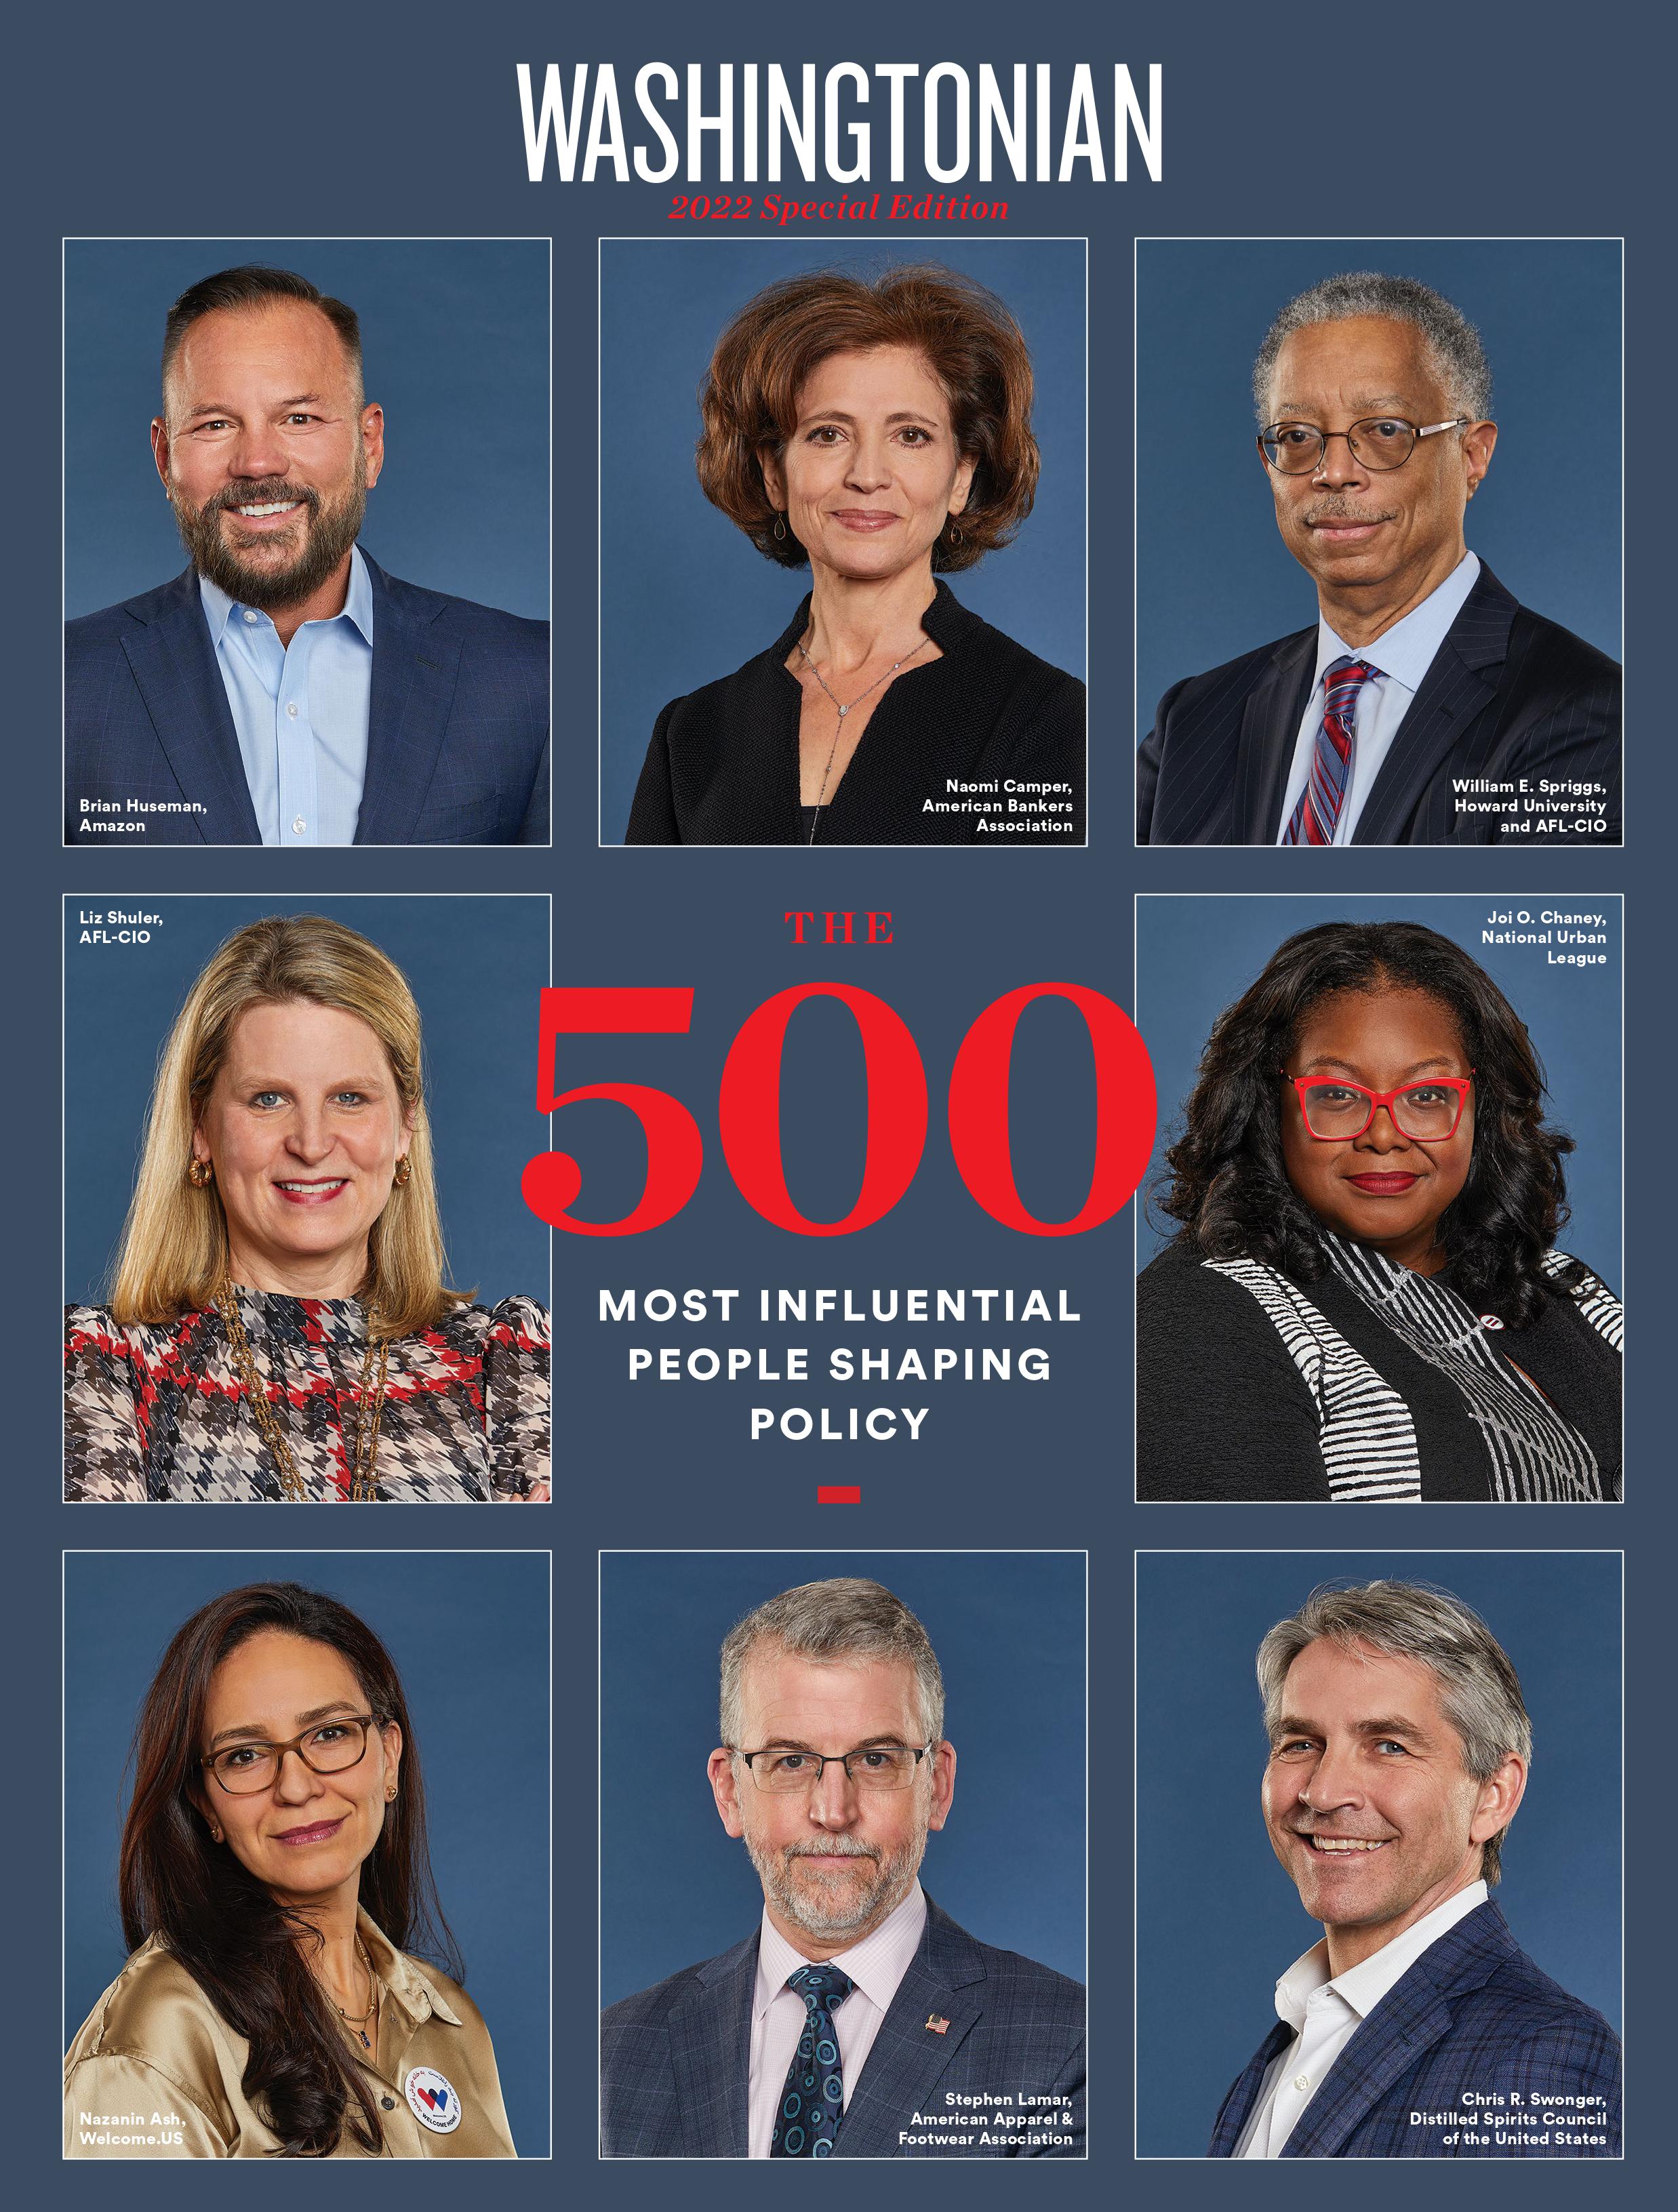 Washington DCs 500 Most Influential People image